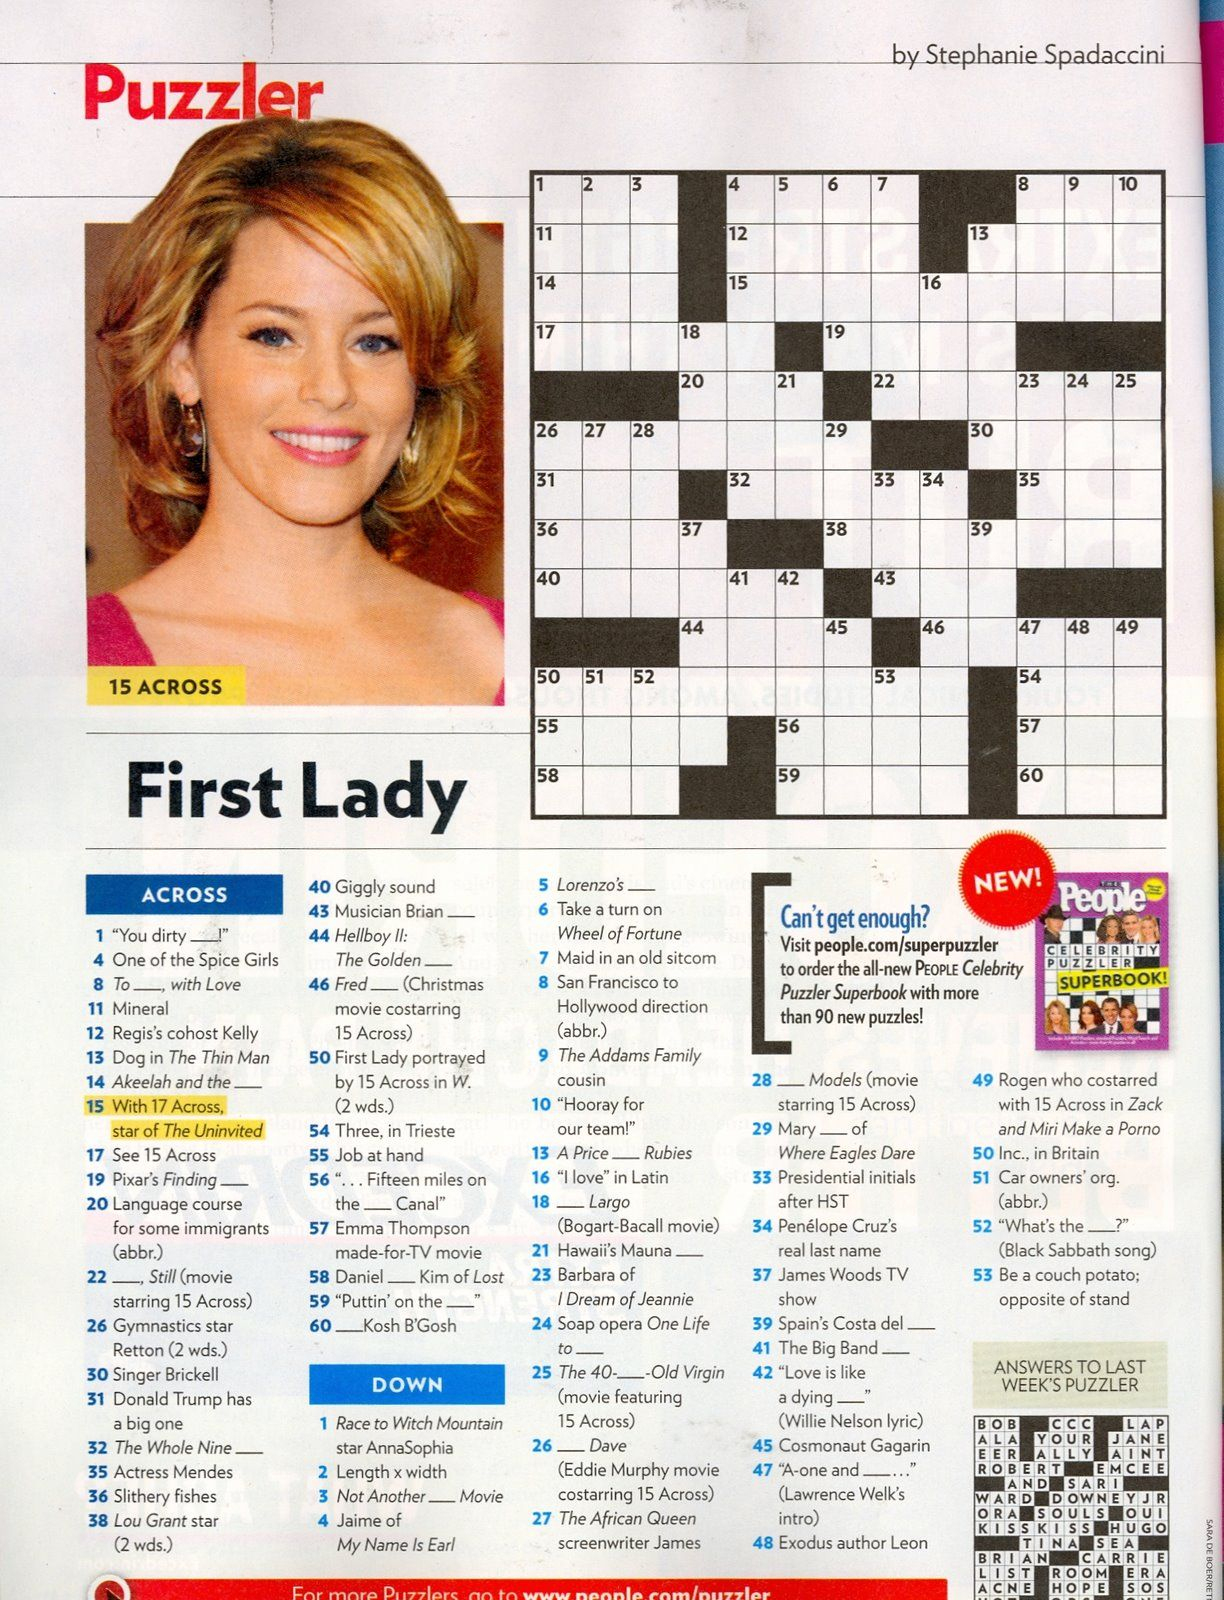 That Time I Was In People Magazine&amp;#039;s Crossword. #tbt | Geeky Stuff - Printable Crossword Puzzles From People Magazine